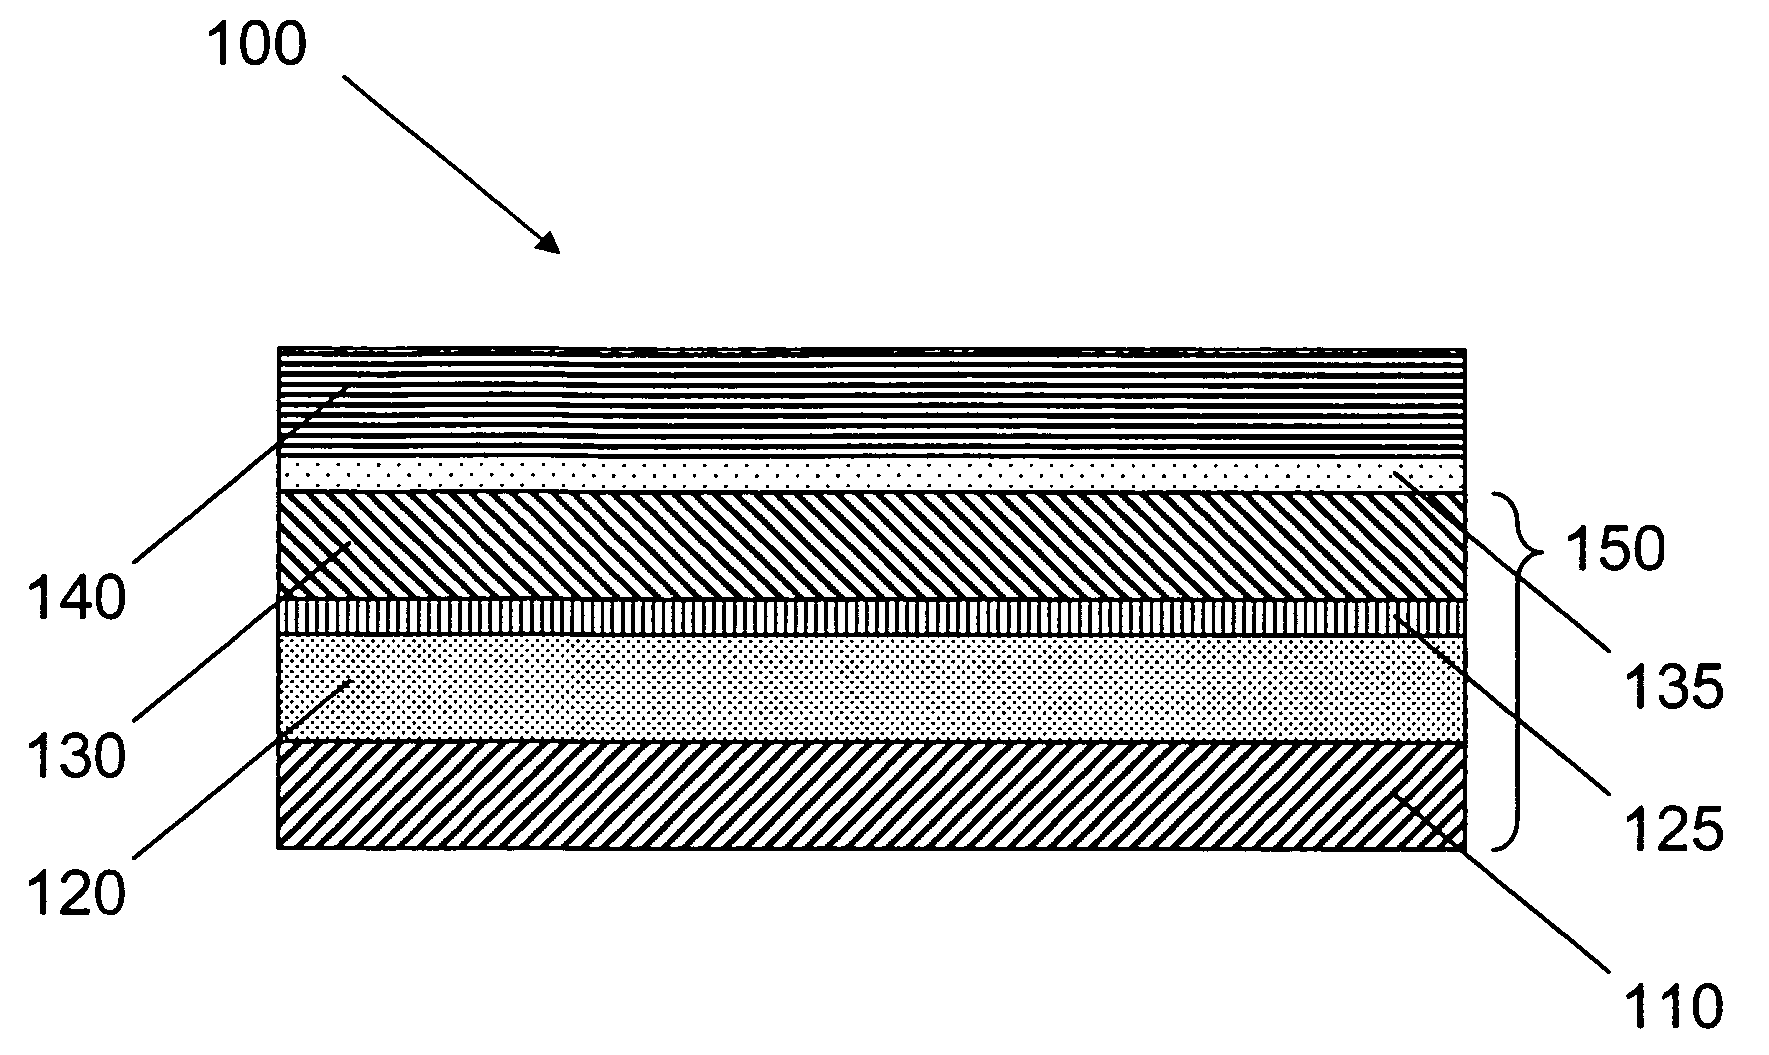 Wide bandgap semiconductor layers on SOD structures